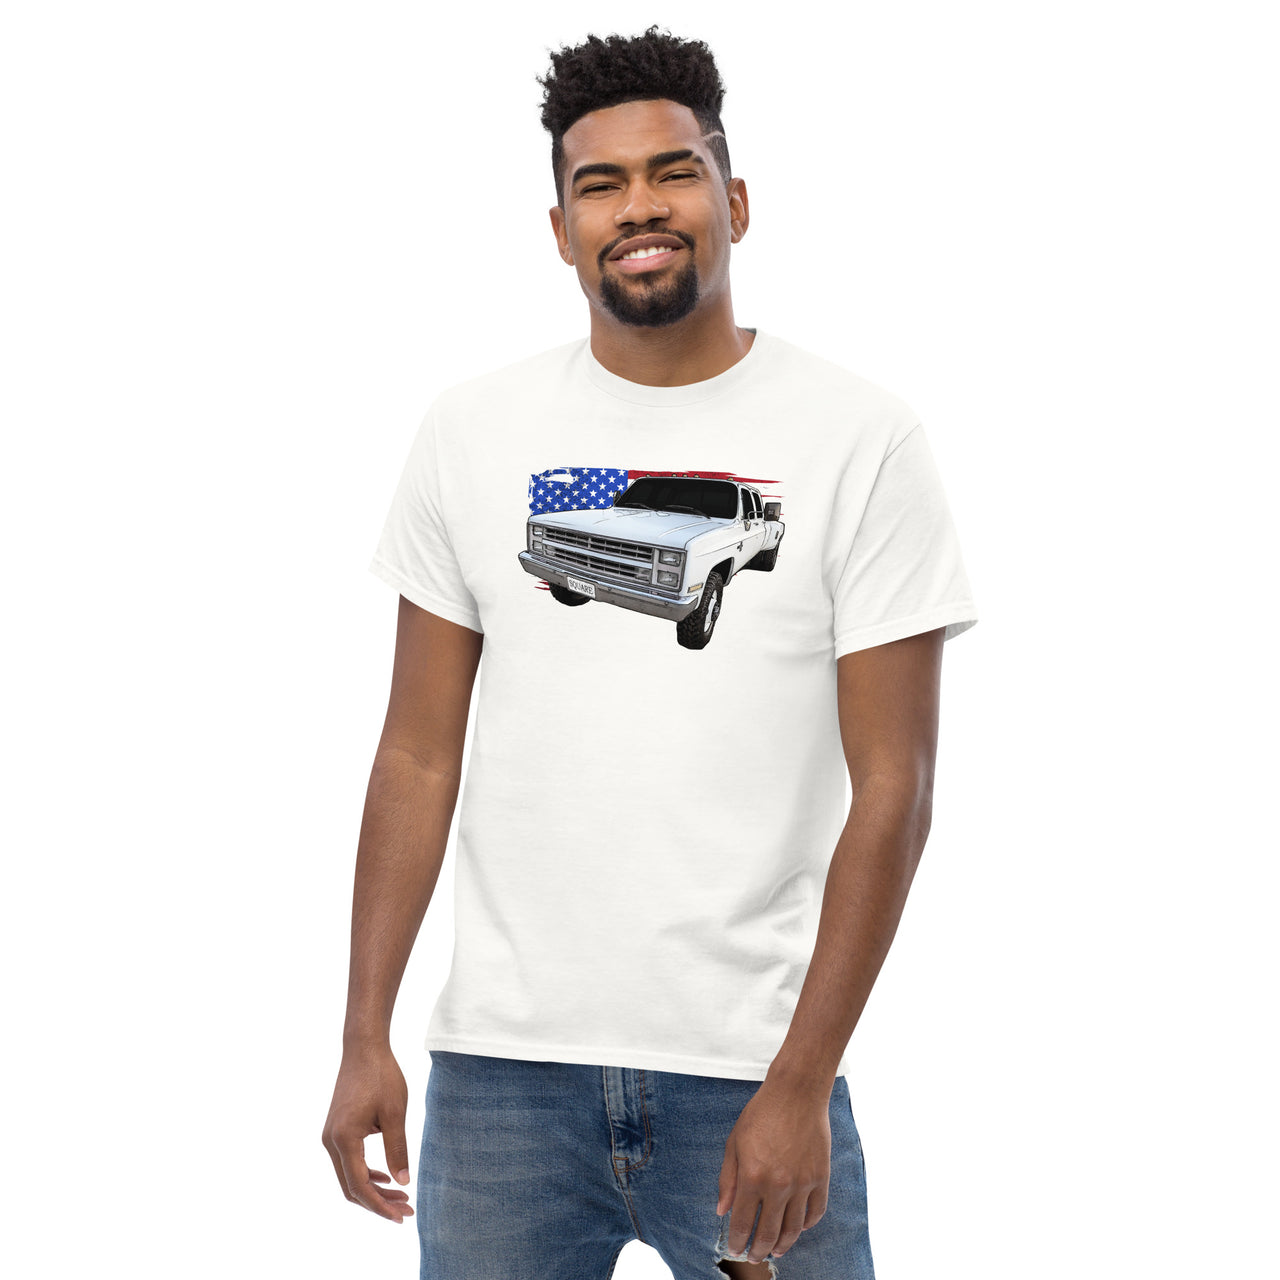 Square Body Dually Crew Cab T-Shirt modeled in white